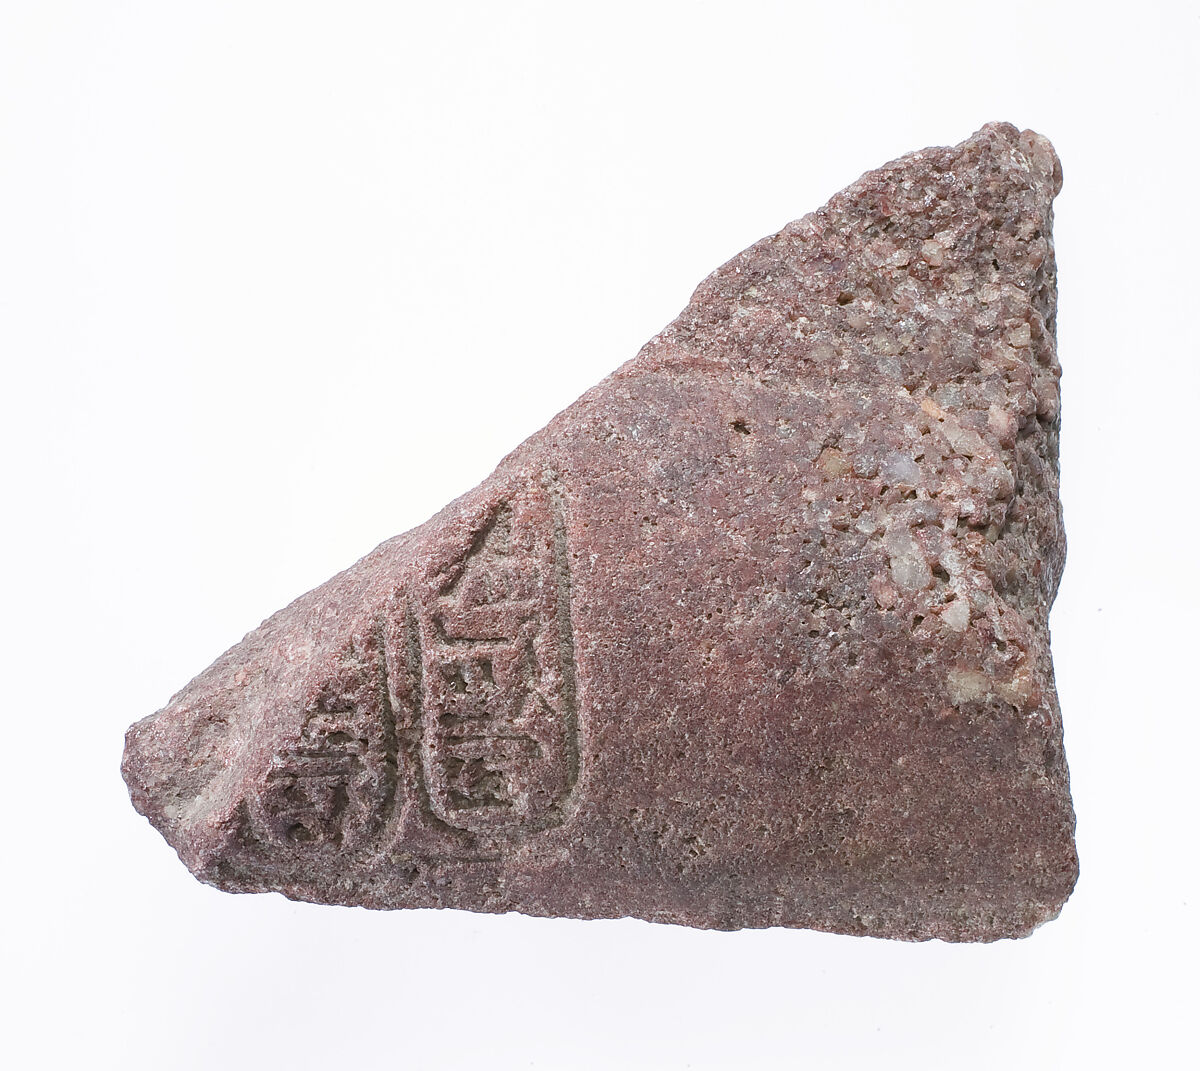 Upraised arm from offering scene with Aten cartouches, Red quartzite 